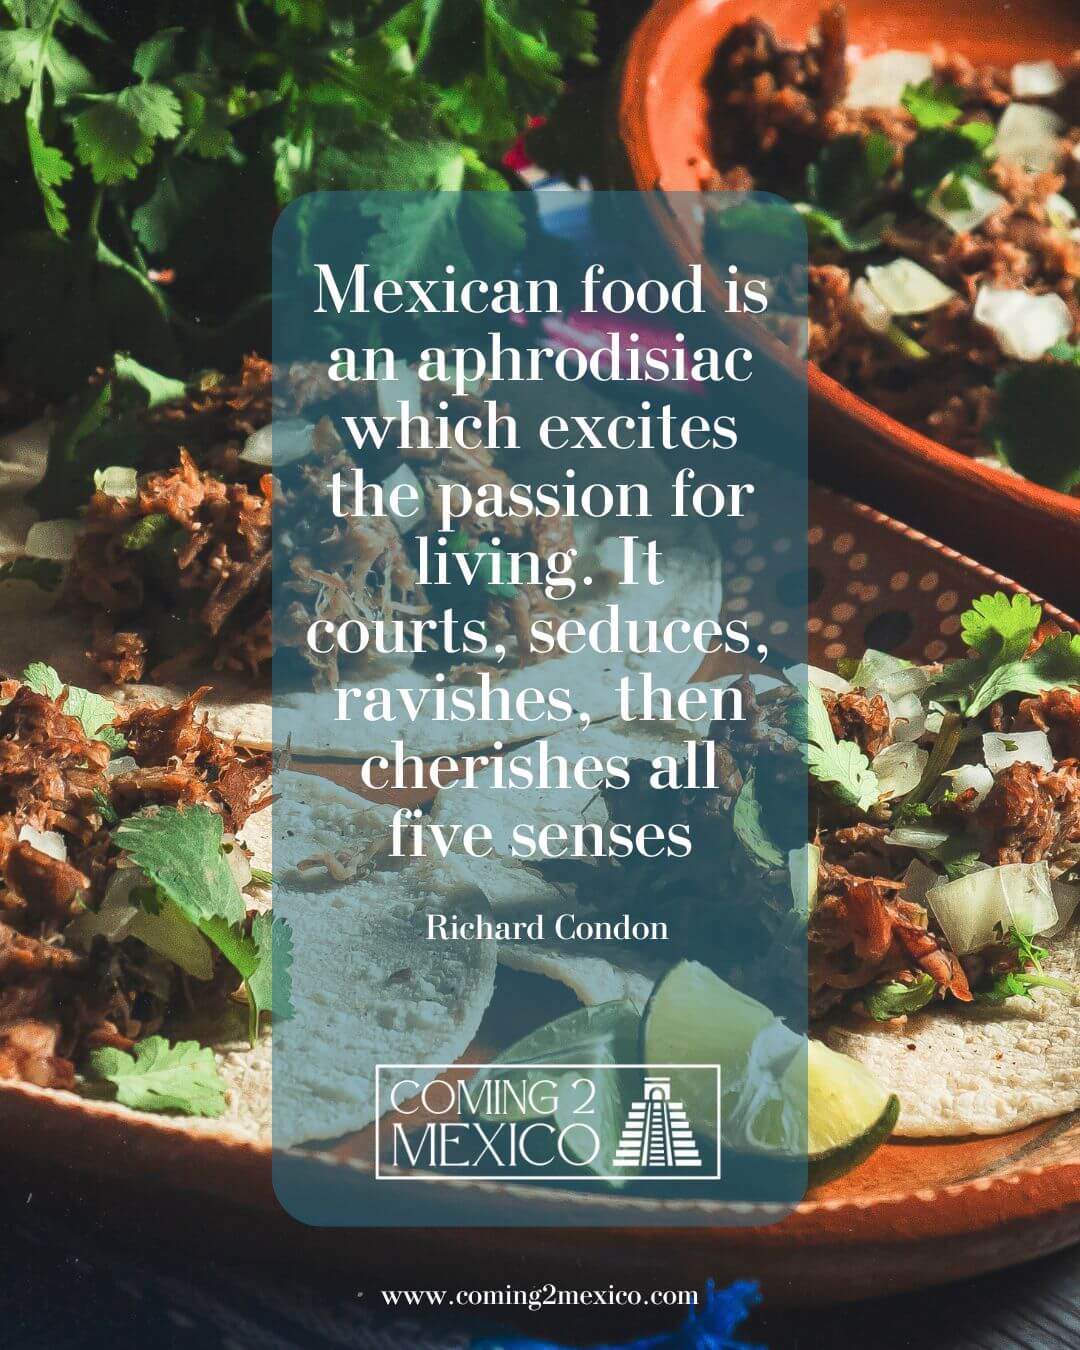 Mexican food is an aphrodisiac which excites the passion for living. It courts, seduces, ravishes, then cherishes all five senses...